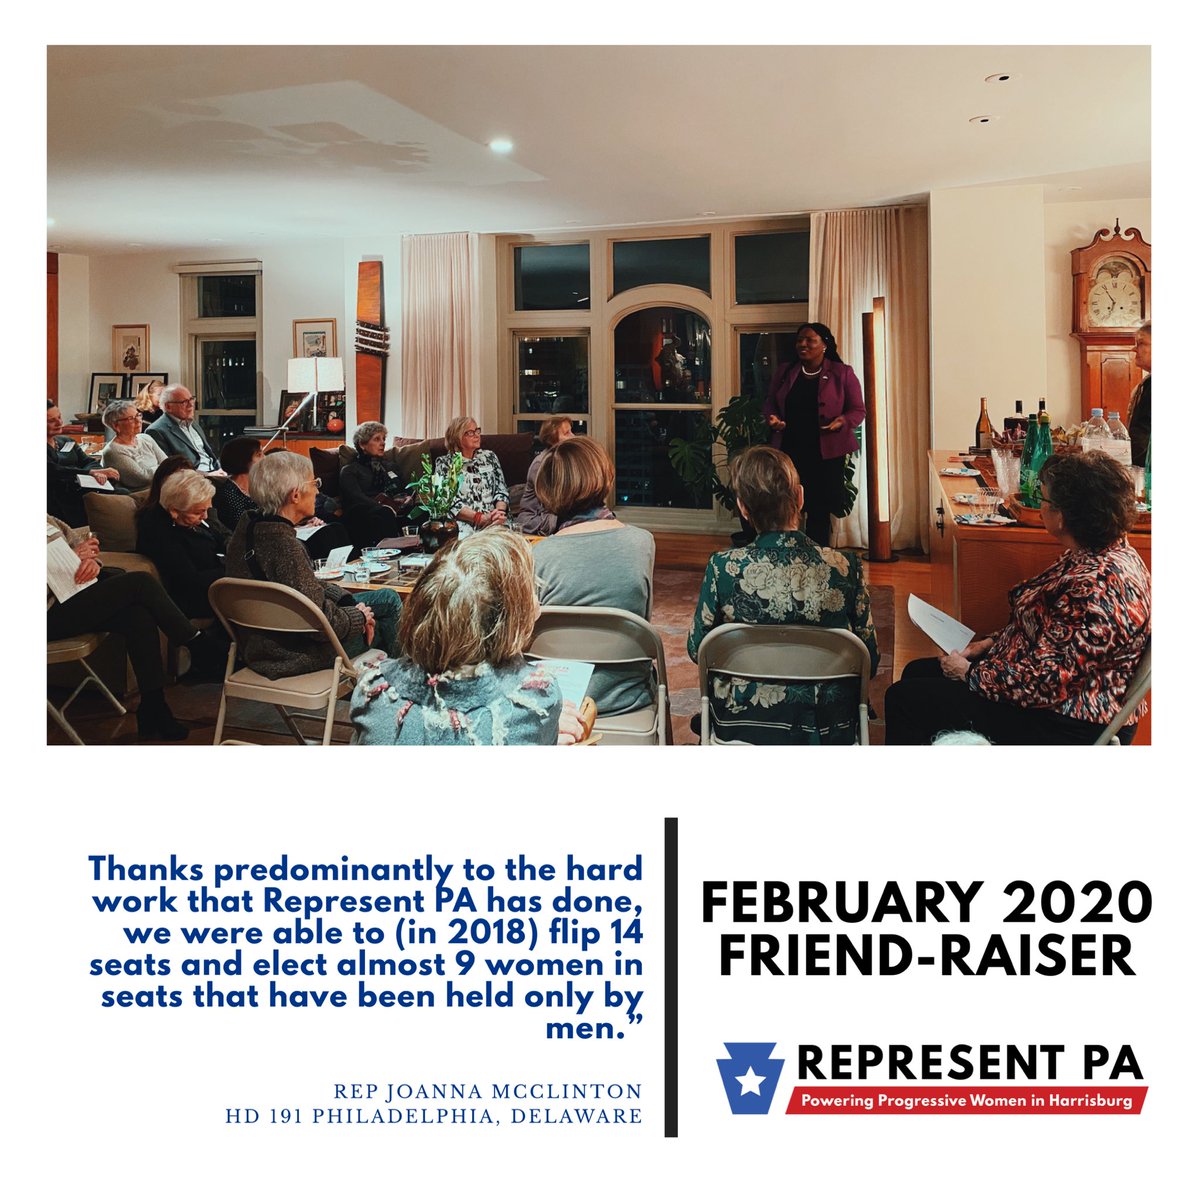 On Feb 13, State Rep Joanna McClinton HD 191 Philadelphia, Delaware shared what it takes to make change in our state. Rep McClinton emphasized how important it is to support the candidates that align with your beliefs & why RPA matters to Democratic #WomenInPolitics. #EventRecap